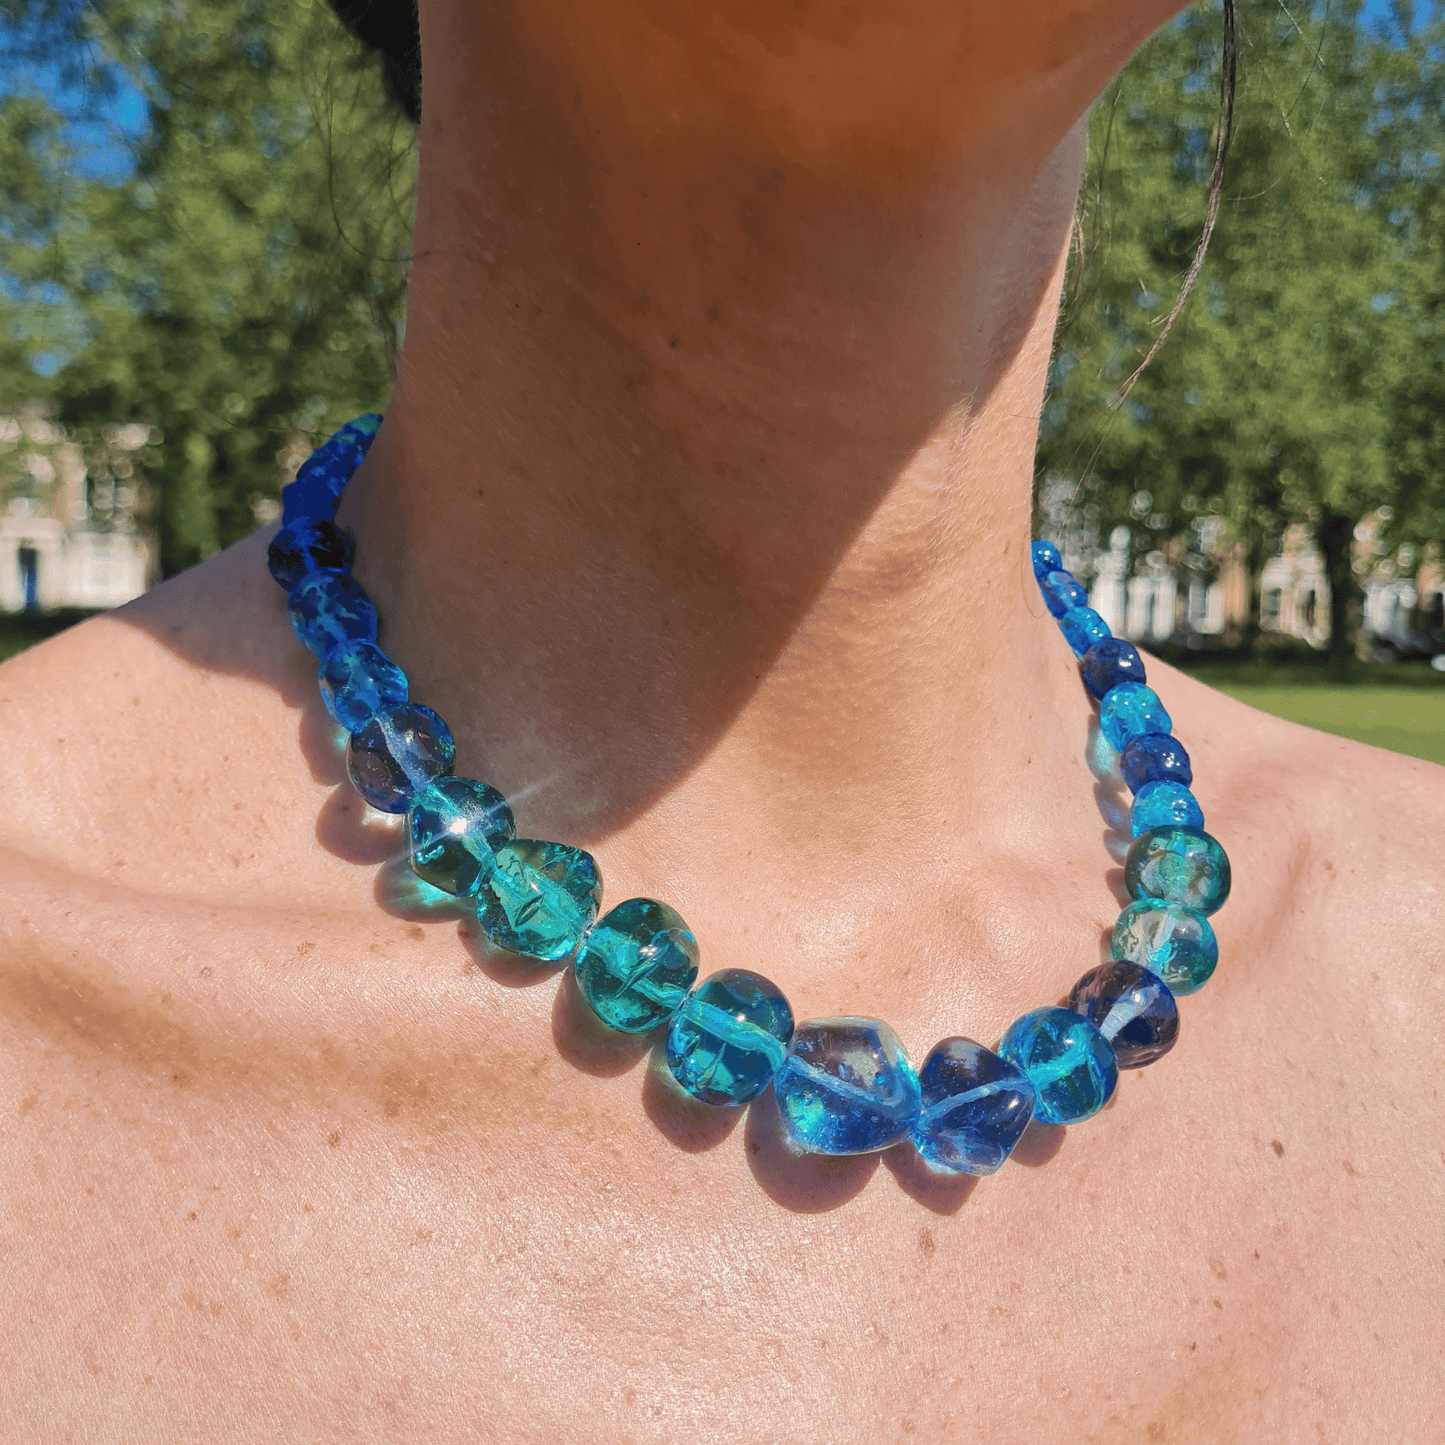 candy necklace blue murano glass beads 